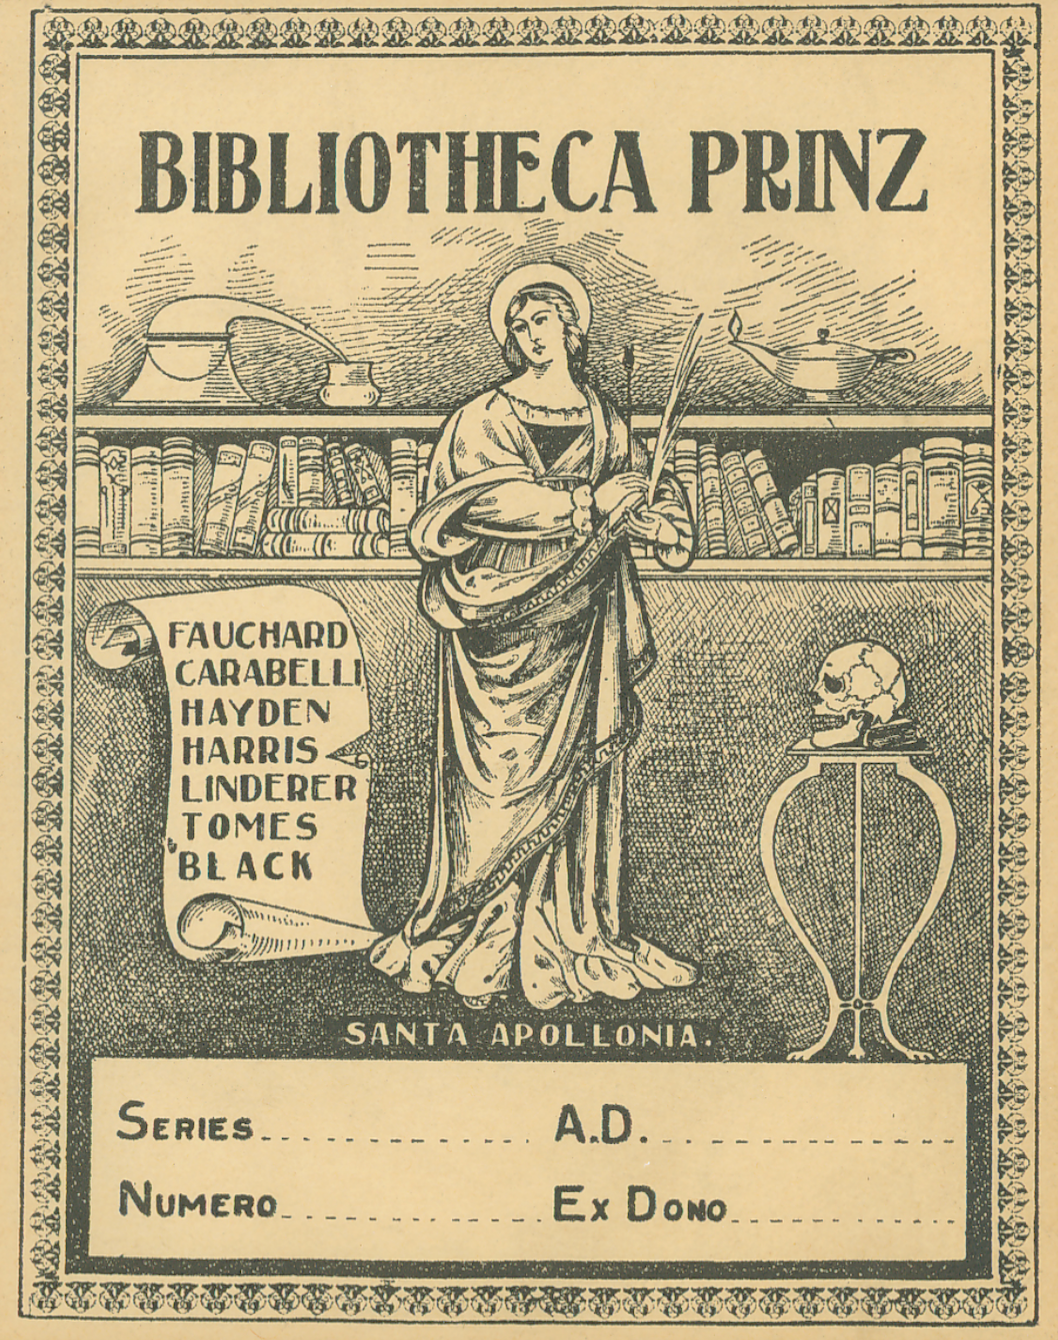 A bookplate shows Saint Apollonia holding a quill pen next to a scroll with names on it.